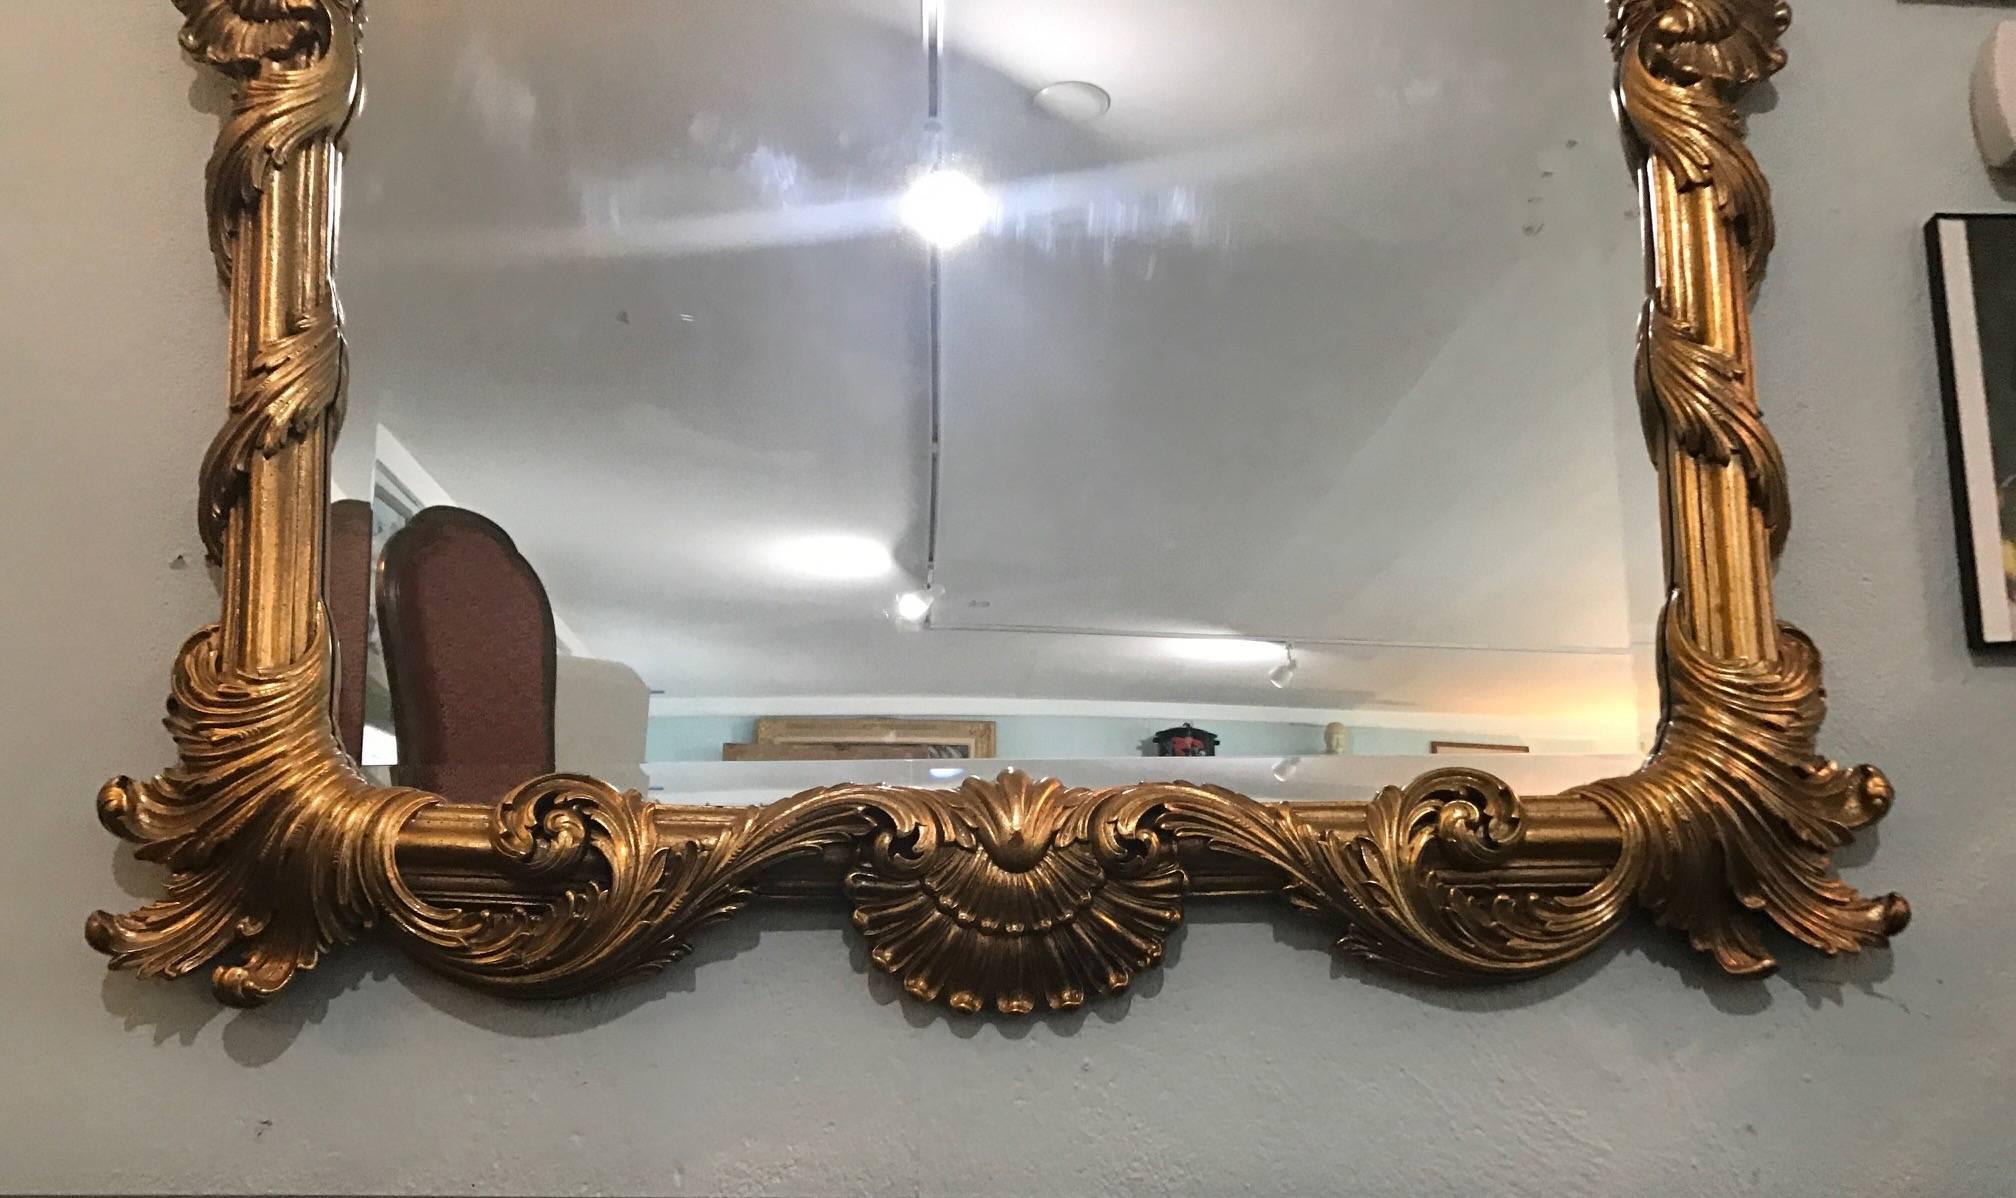 American La Barge Handcrafted Mirror Hand-Carved and Gilded Seashell Design Wall Mirror